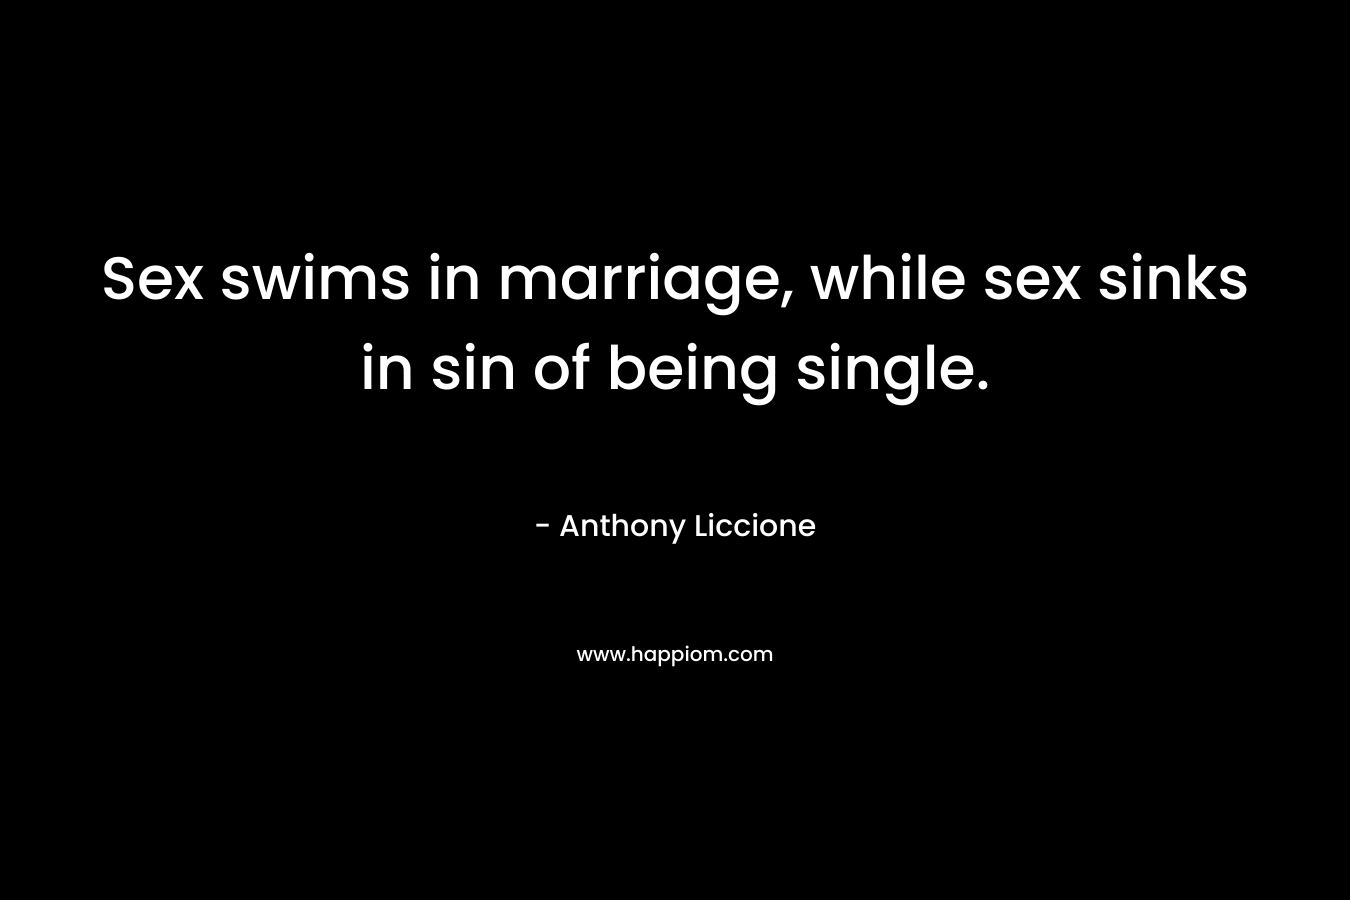 Sex swims in marriage, while sex sinks in sin of being single.